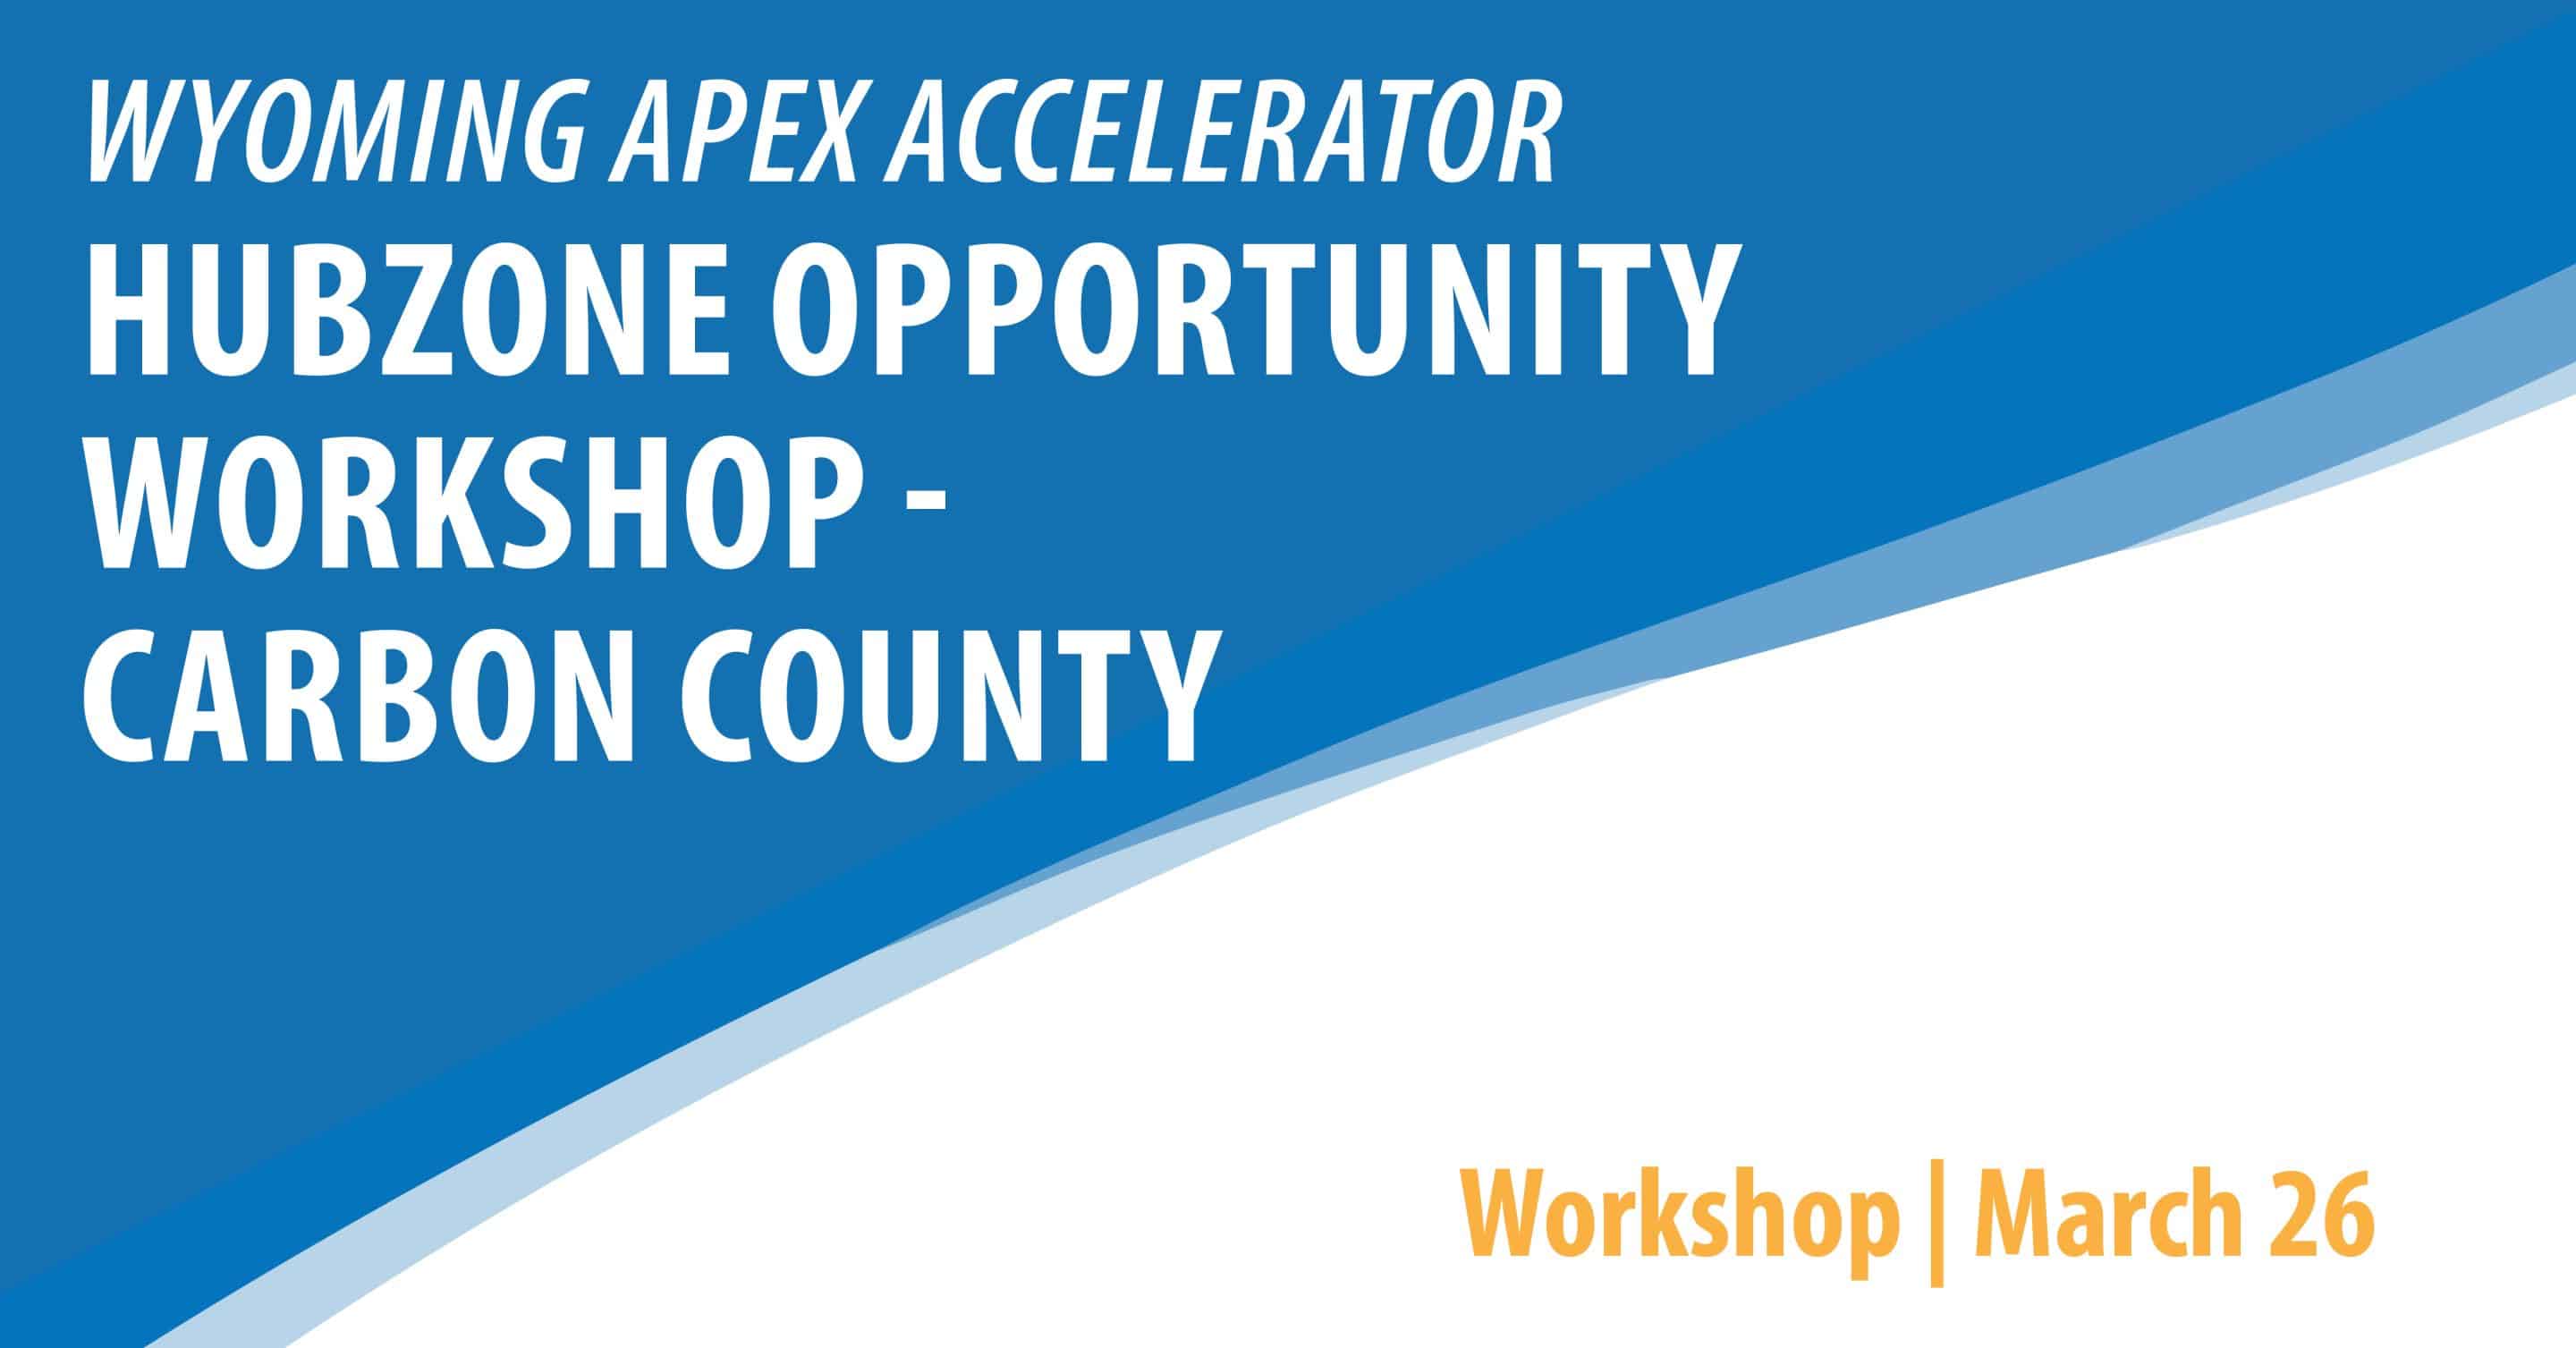 HUBZone Opportunity Workshop - Carbon County